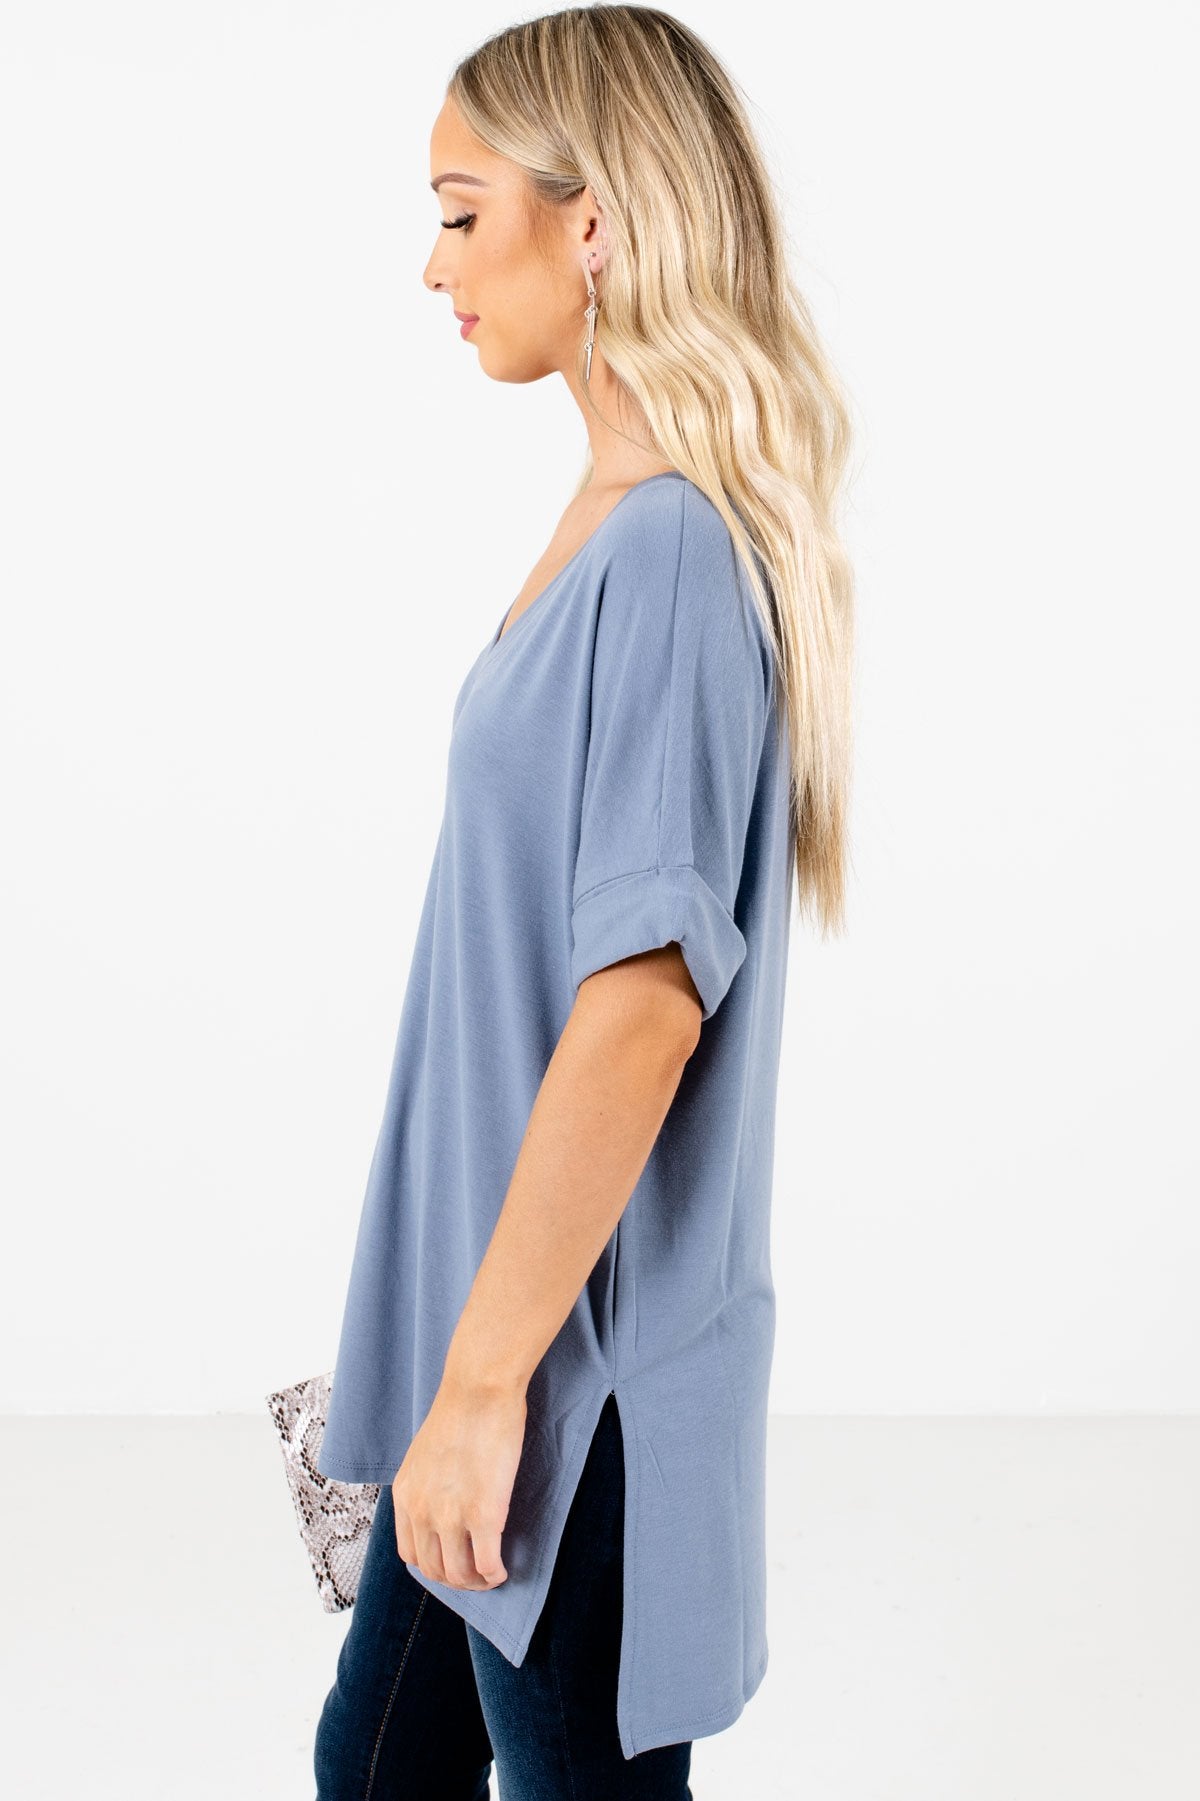 Blue Layering Boutique Tops for Women